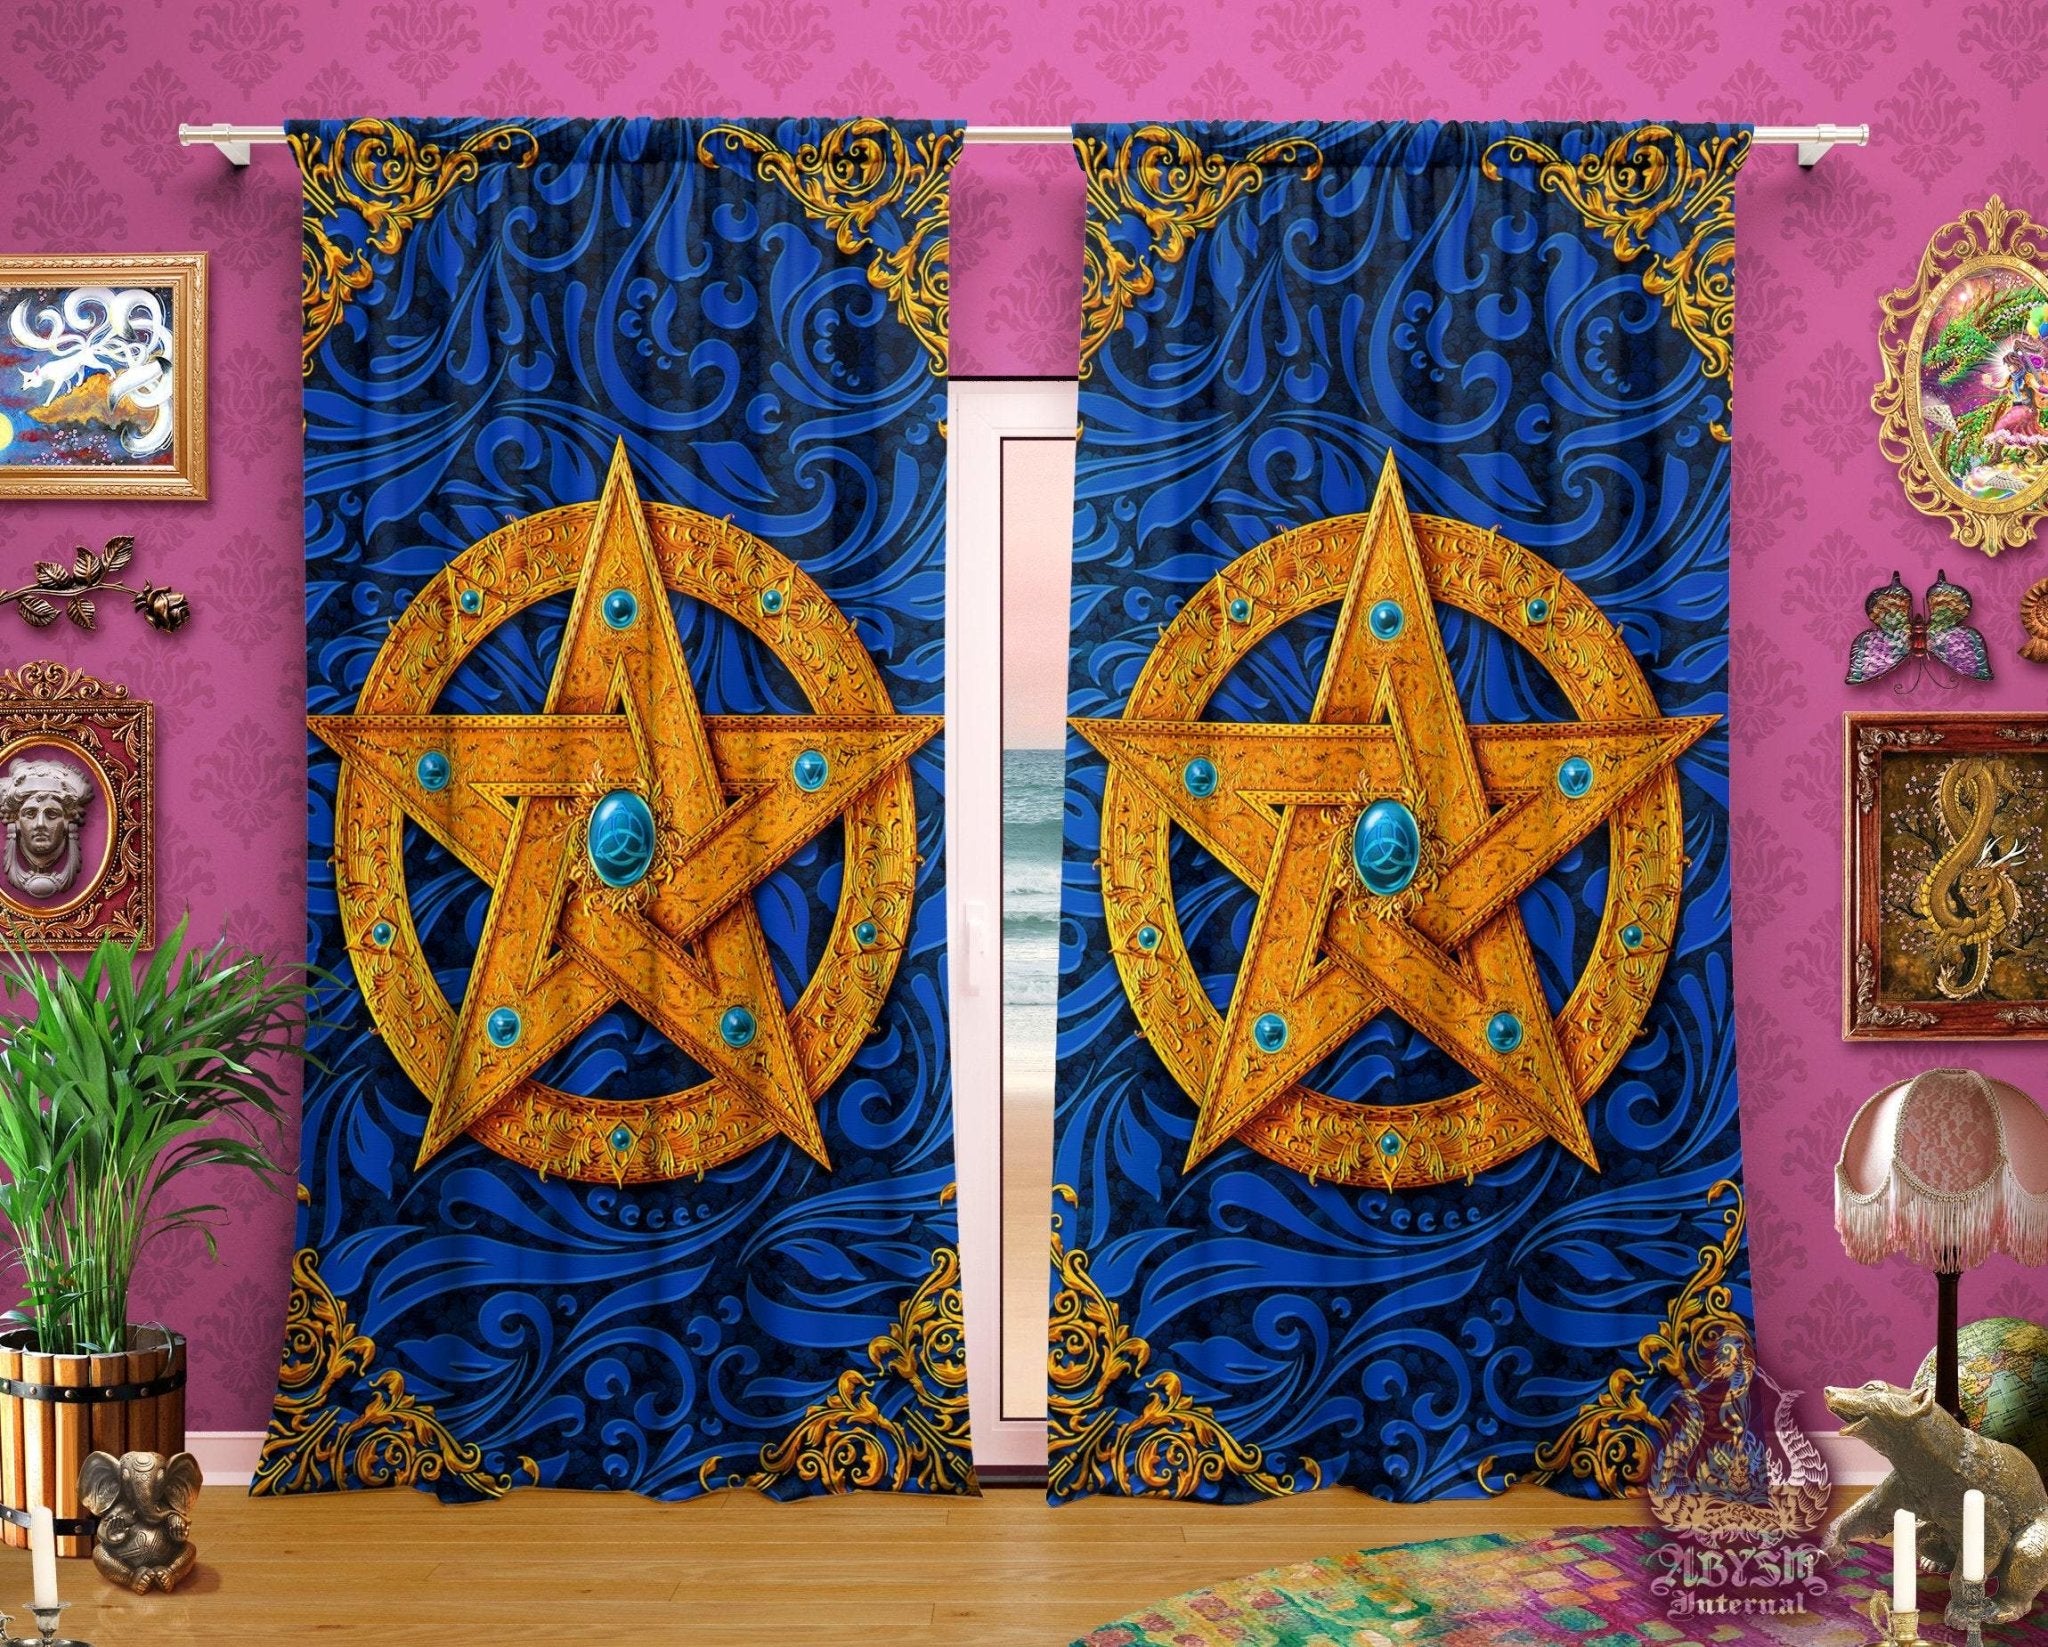 Pagan Blackout Curtains, Long Window Panels, Pentacle, Wicca Room Decor, Art Print, Funky and Eclectic Home Decor - Blue - Abysm Internal